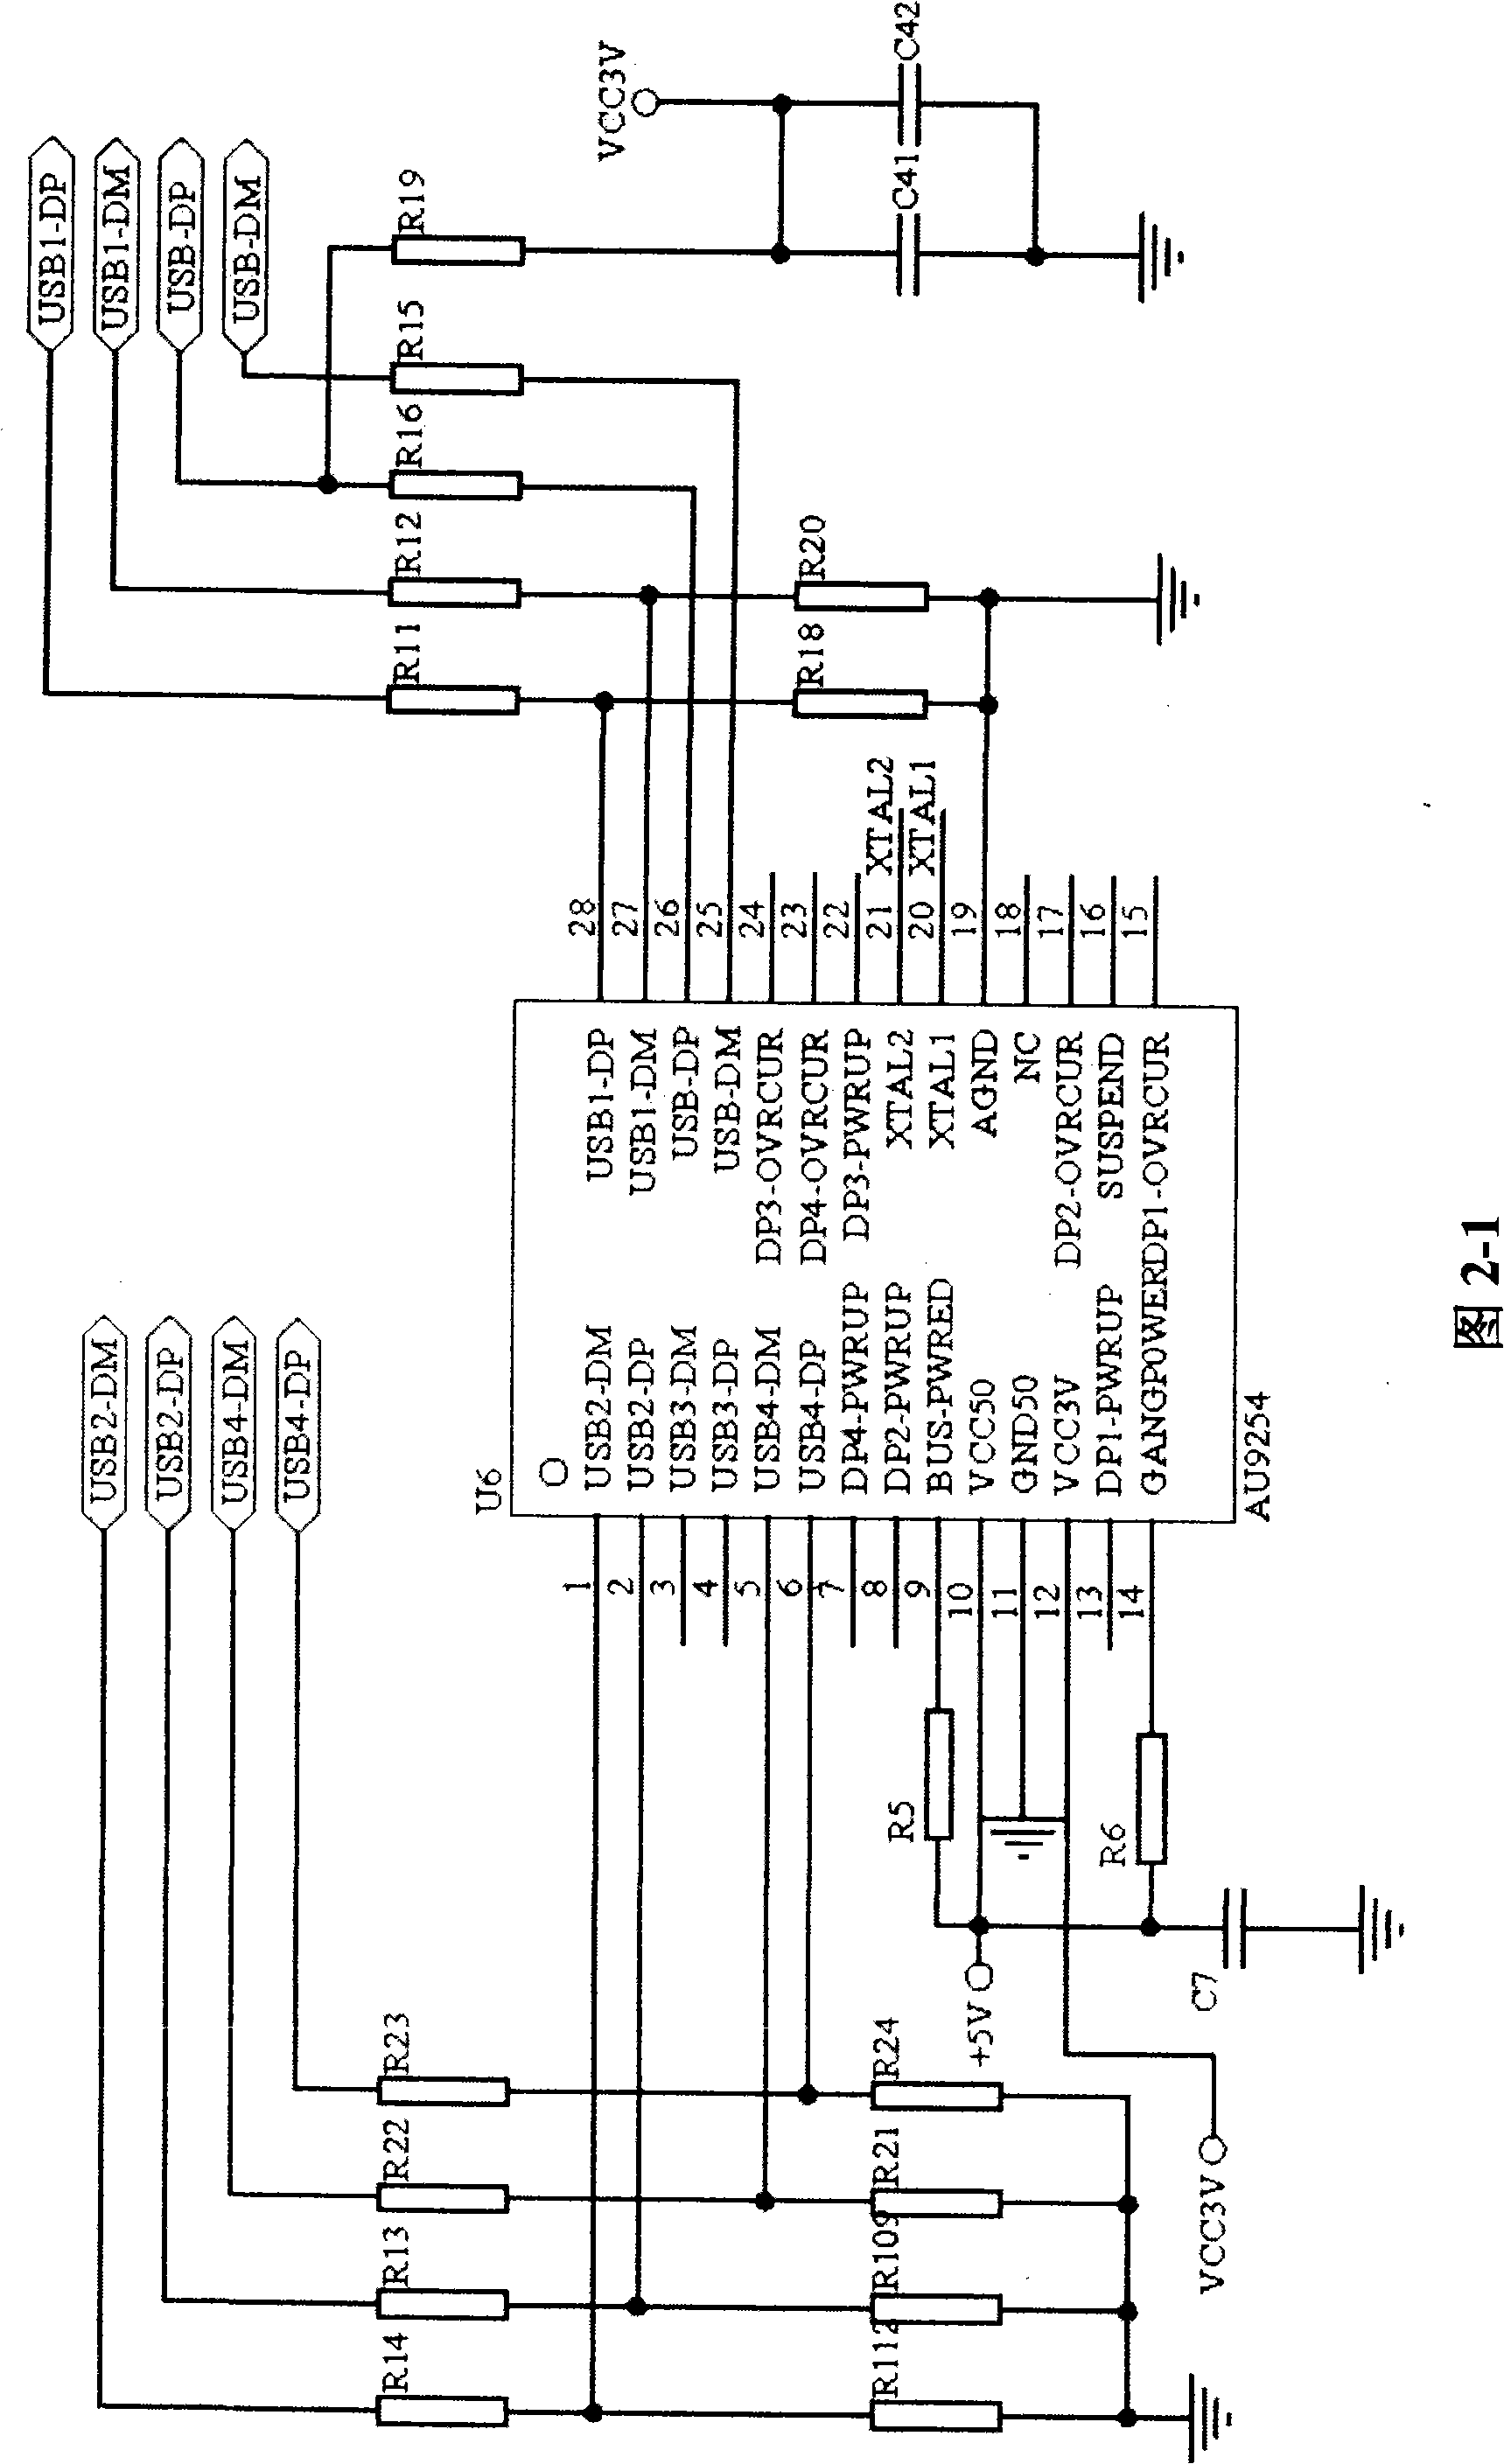 Switching system relating computer inner-external network data safety